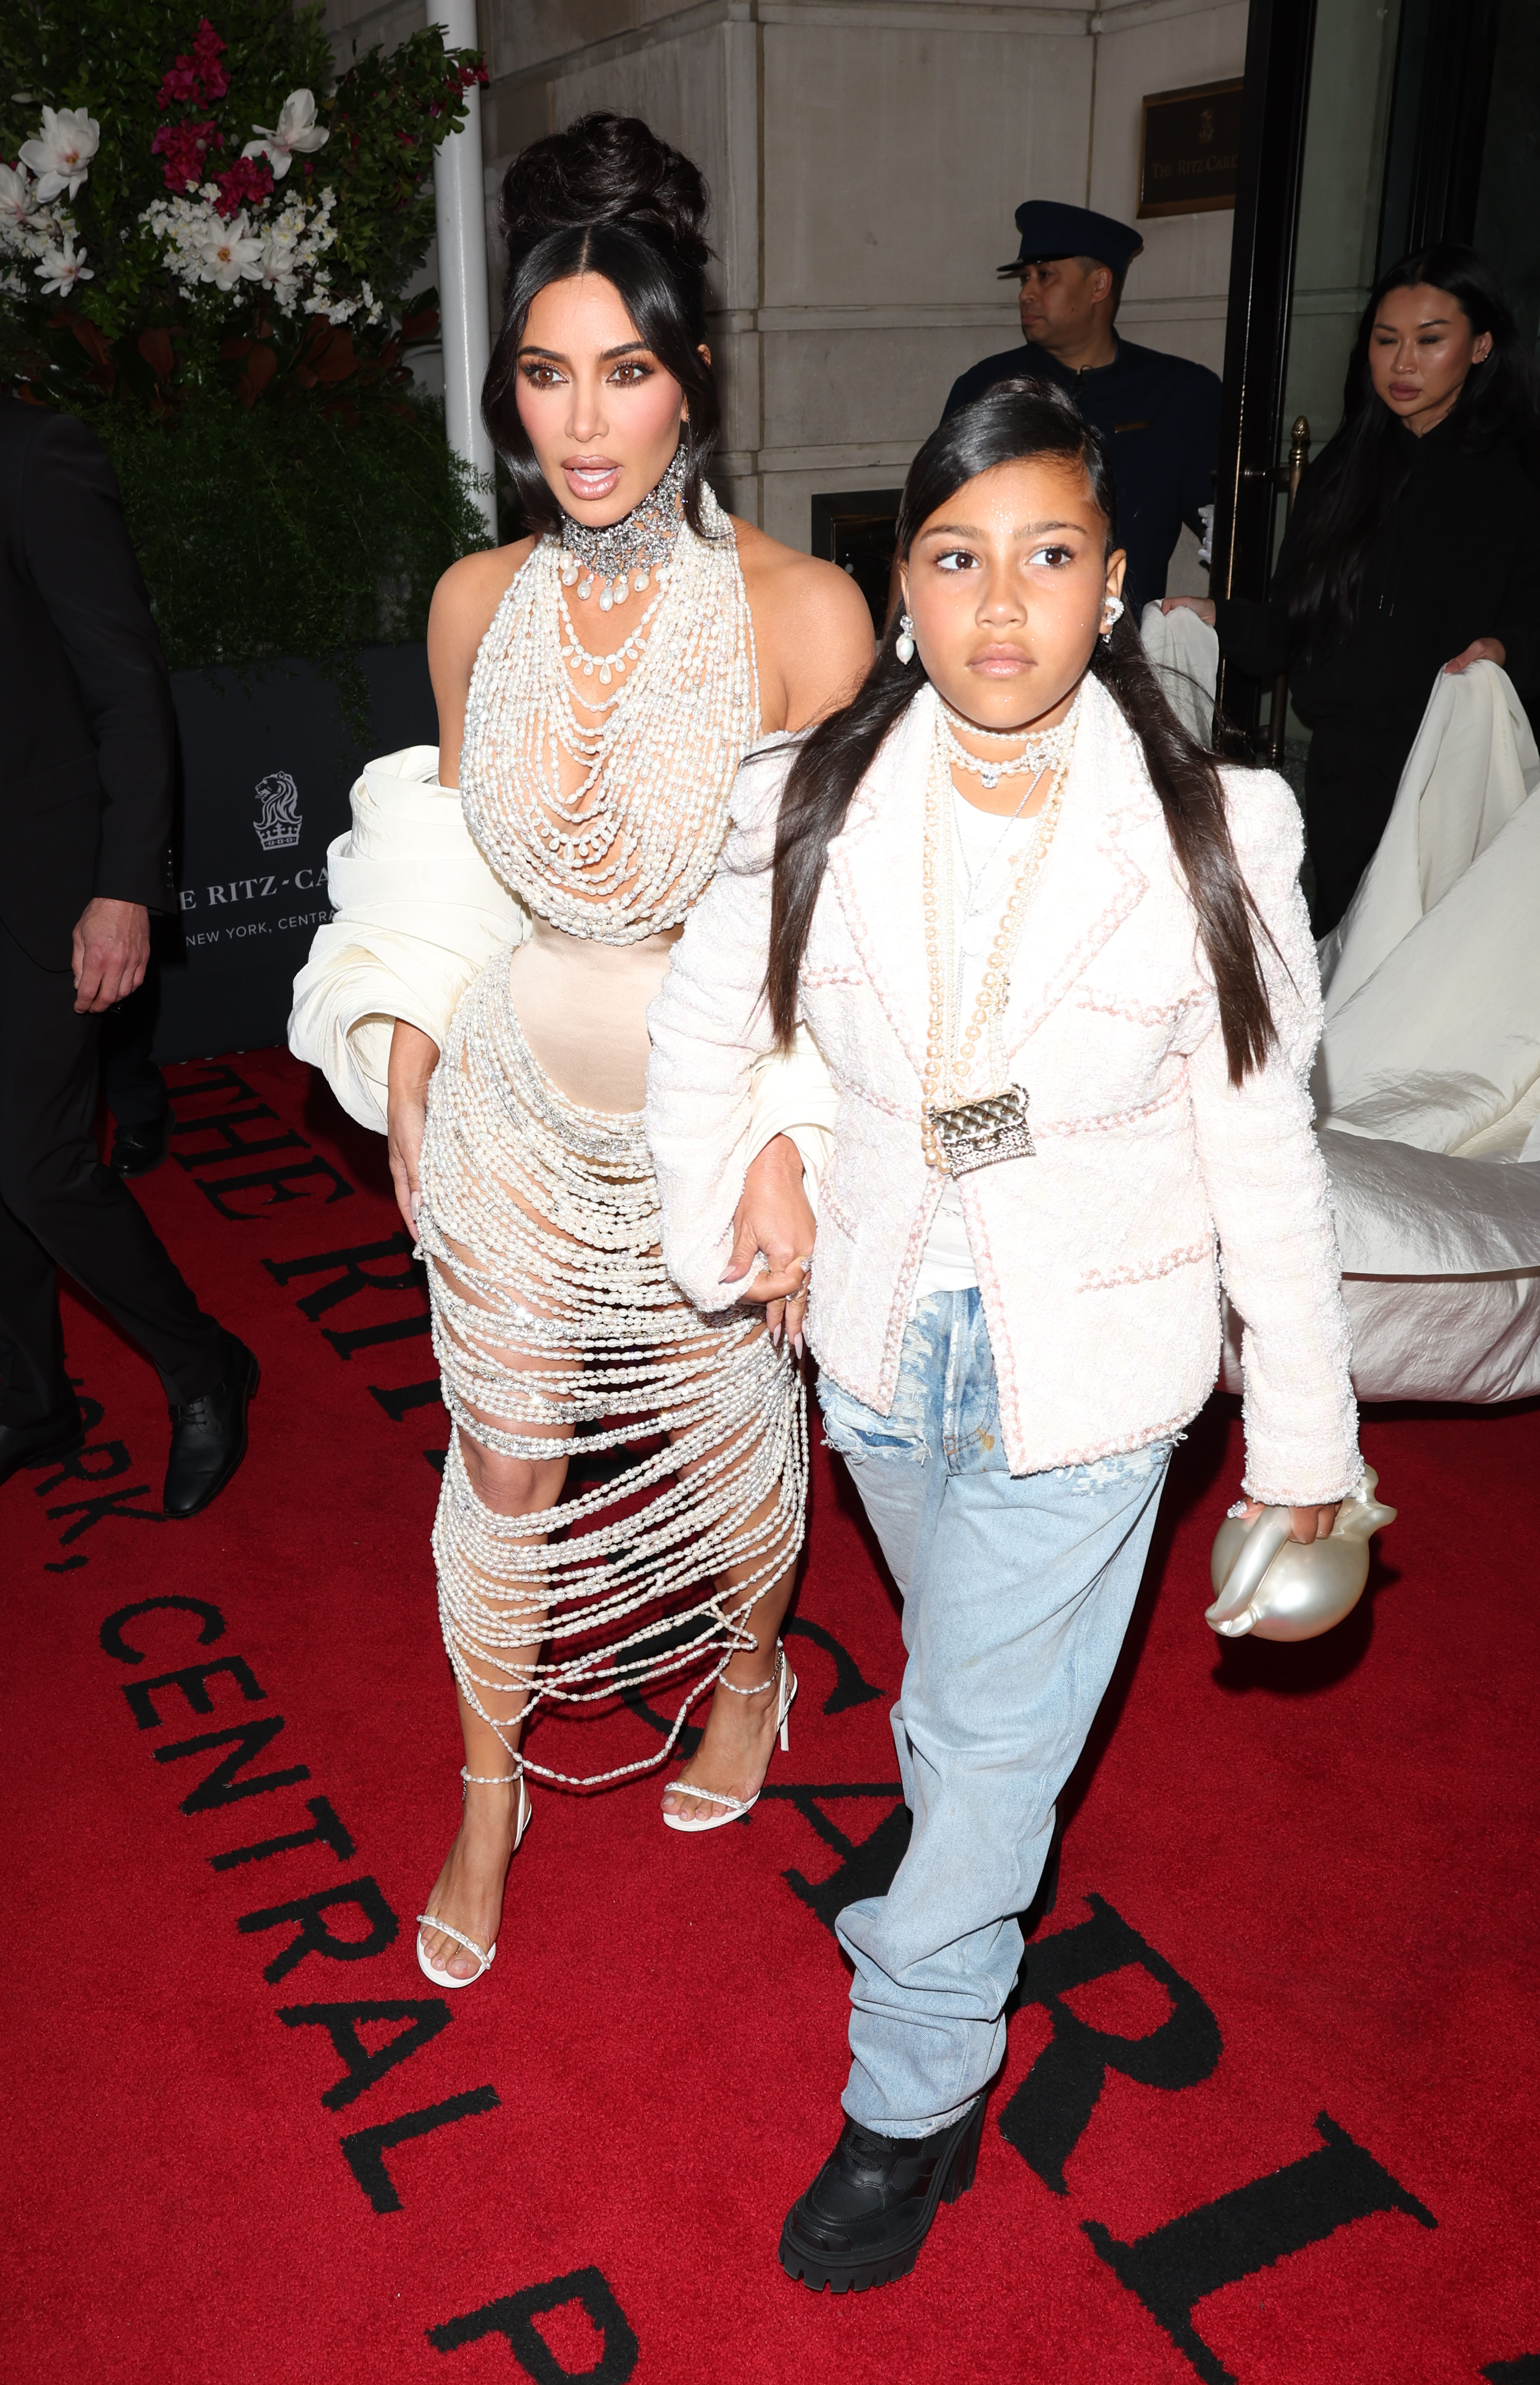 In the episode, North revealed that she would be 'honored' to attend the Met Gala in 2024